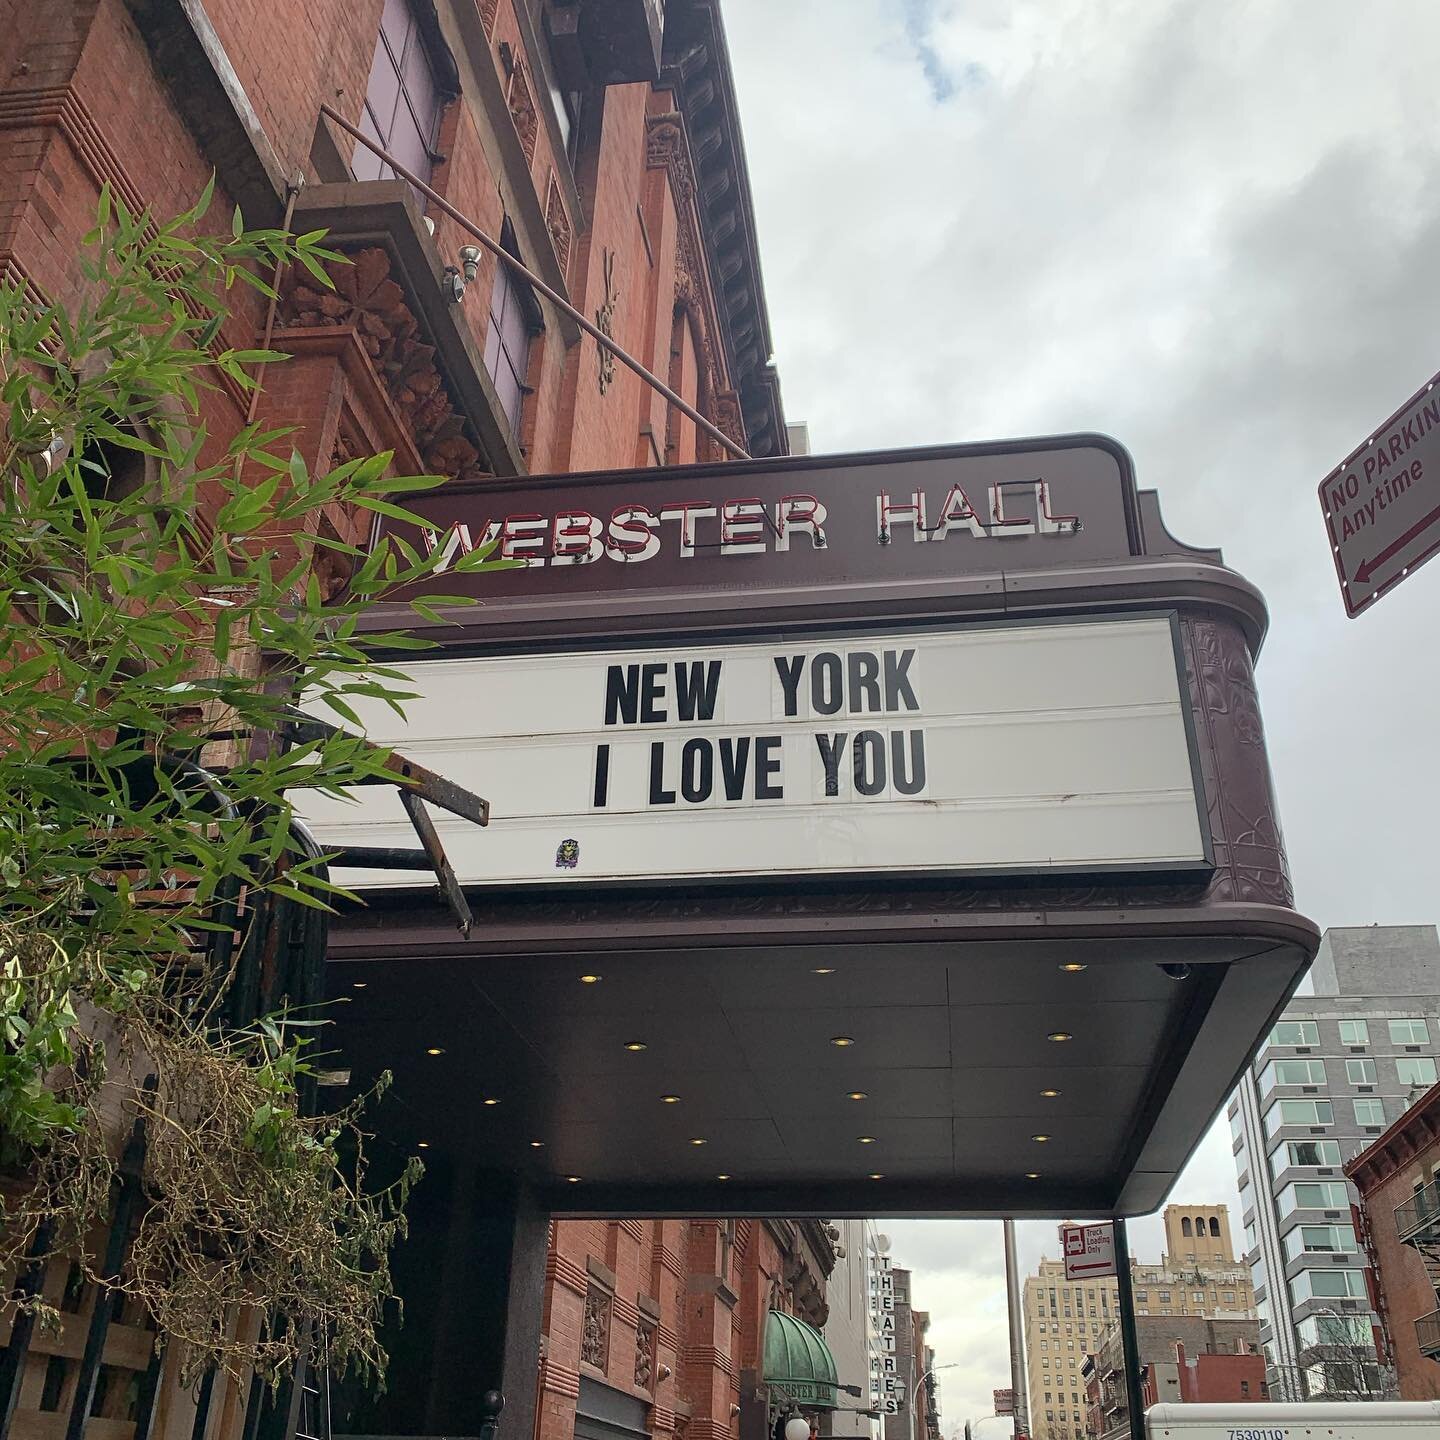 around the city

#newyorkcity #nyc #ny #city #manhattan #streets #goodmorning when i stumbled across this the other day it had made me smile lol #webster #websterhall